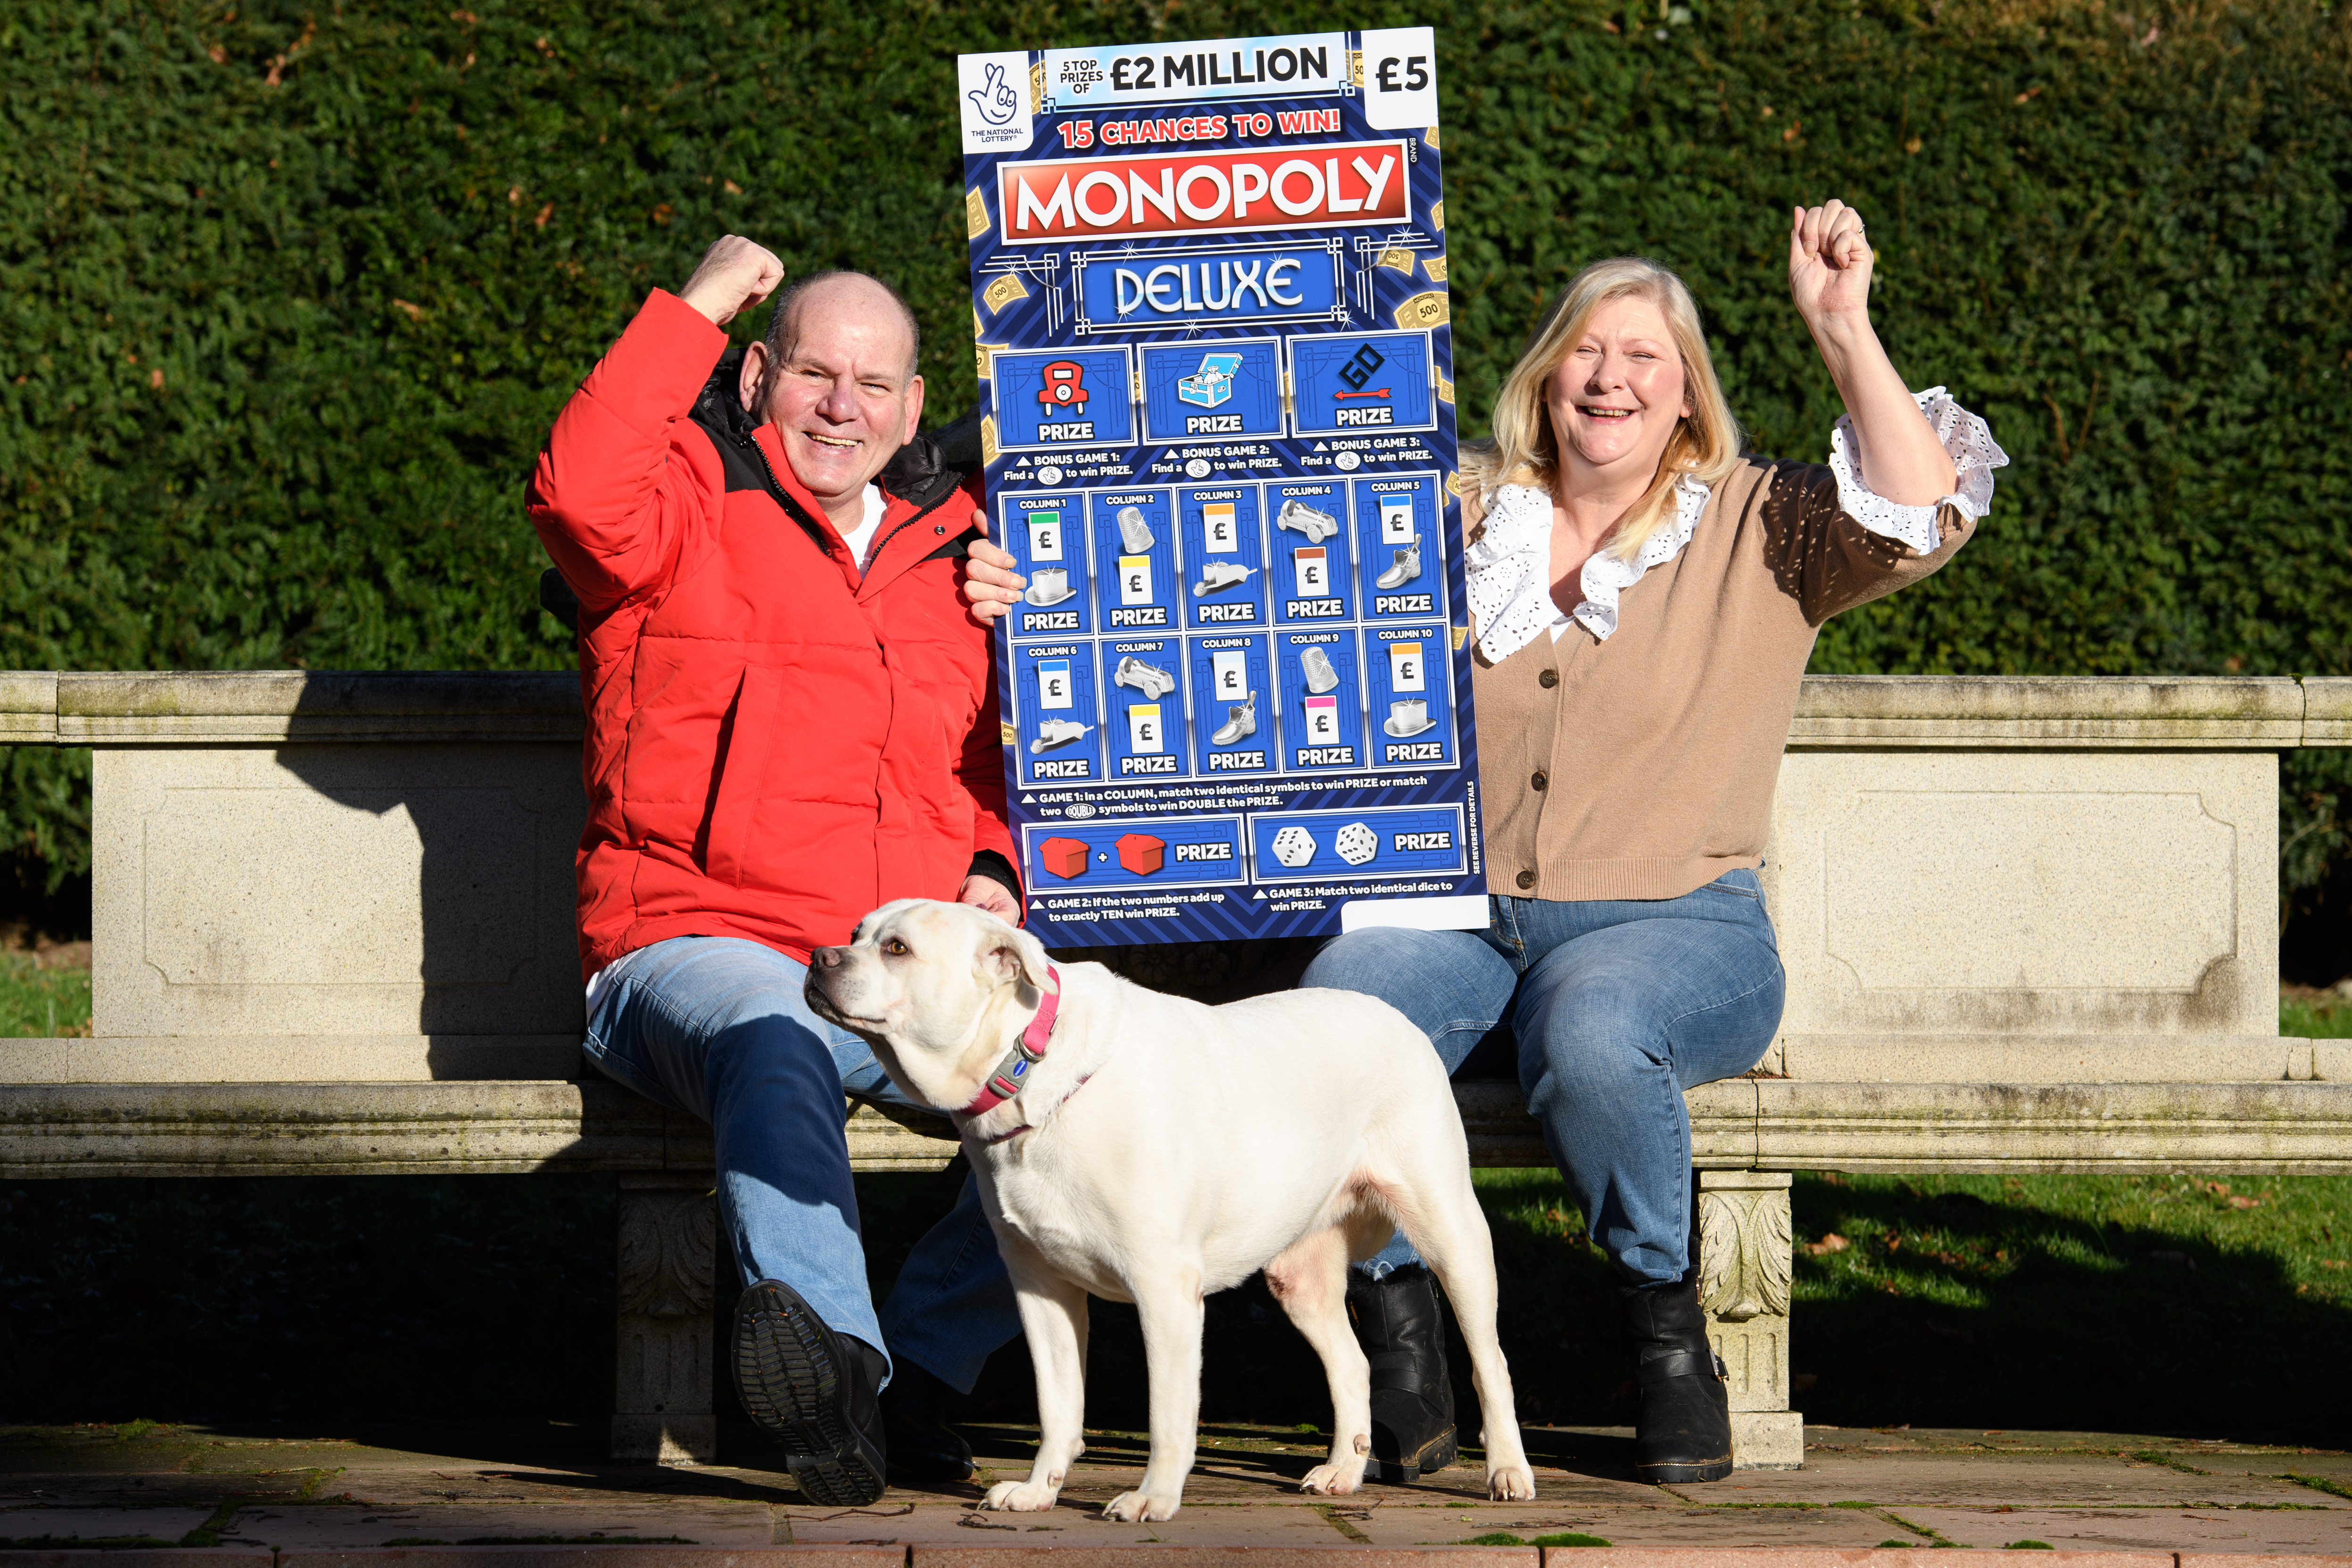 Ian and Sandra with their dog Meg. The couple say the first thing they do with their winnings is pay for Meg's operation. Undated image from Oli Scarff/Camelot